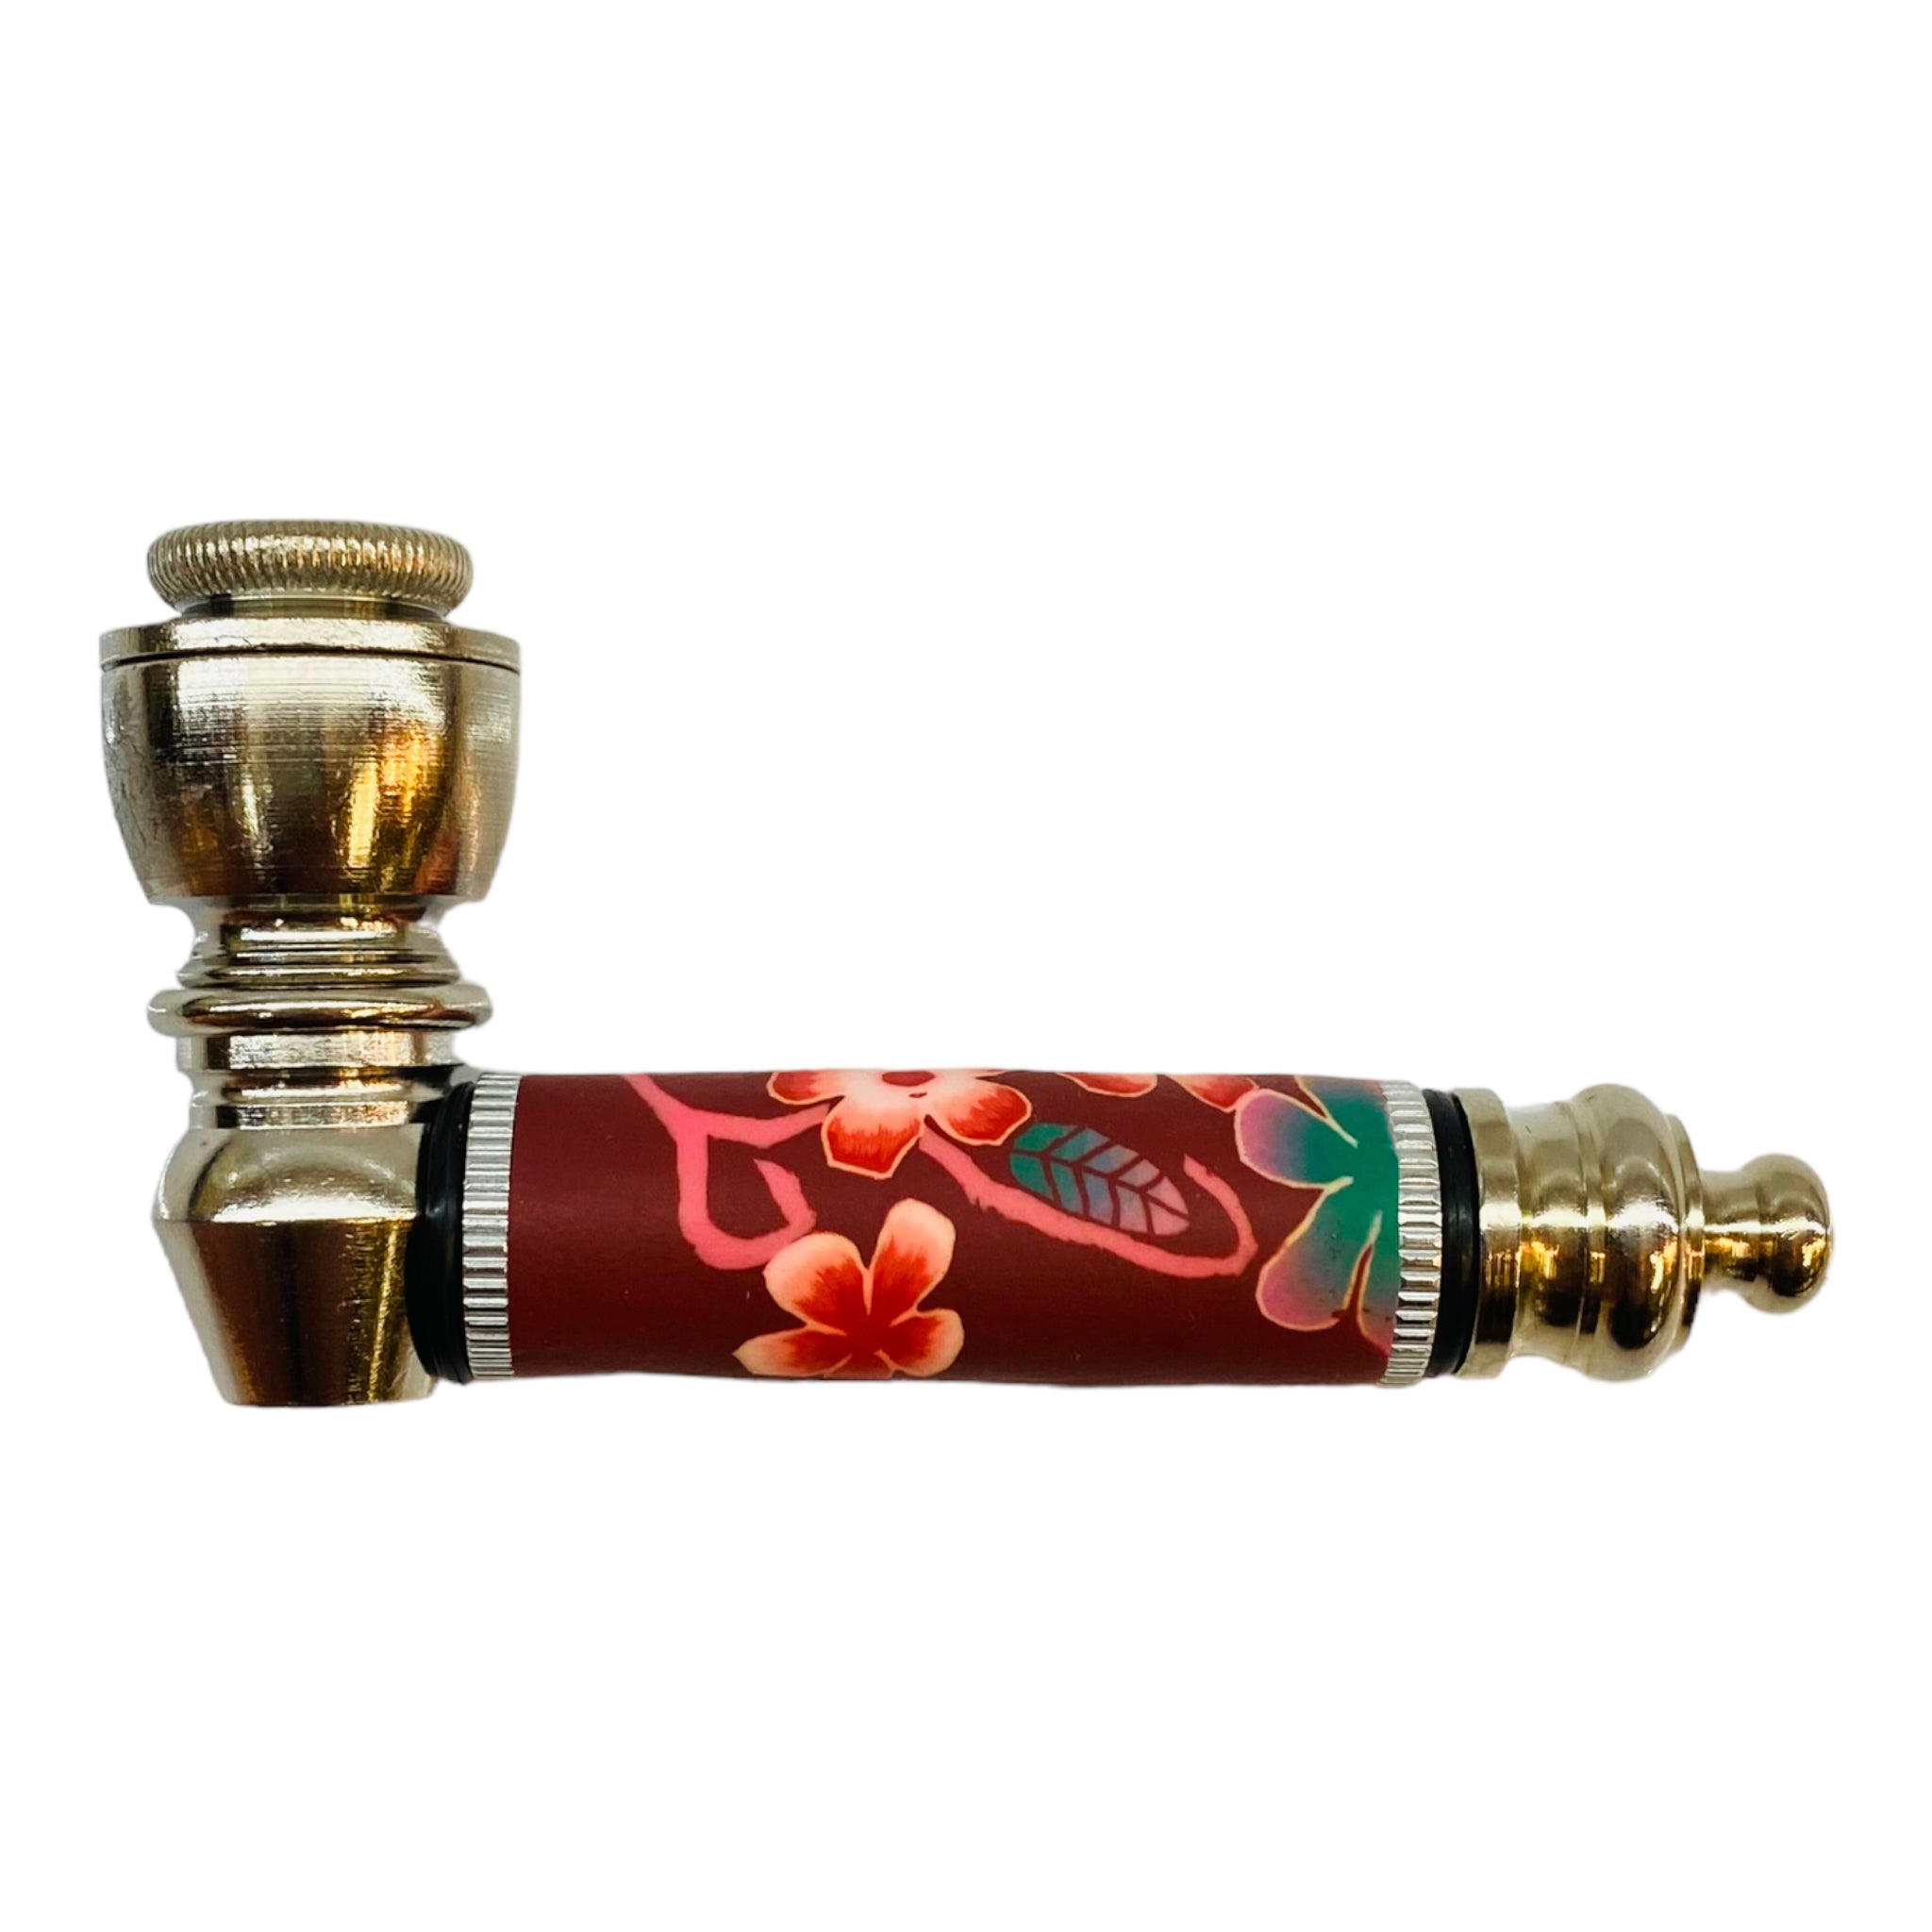 Metal Hand Pipes - Silver Chrome Hand Pipe With Pink Cherry Blossoms